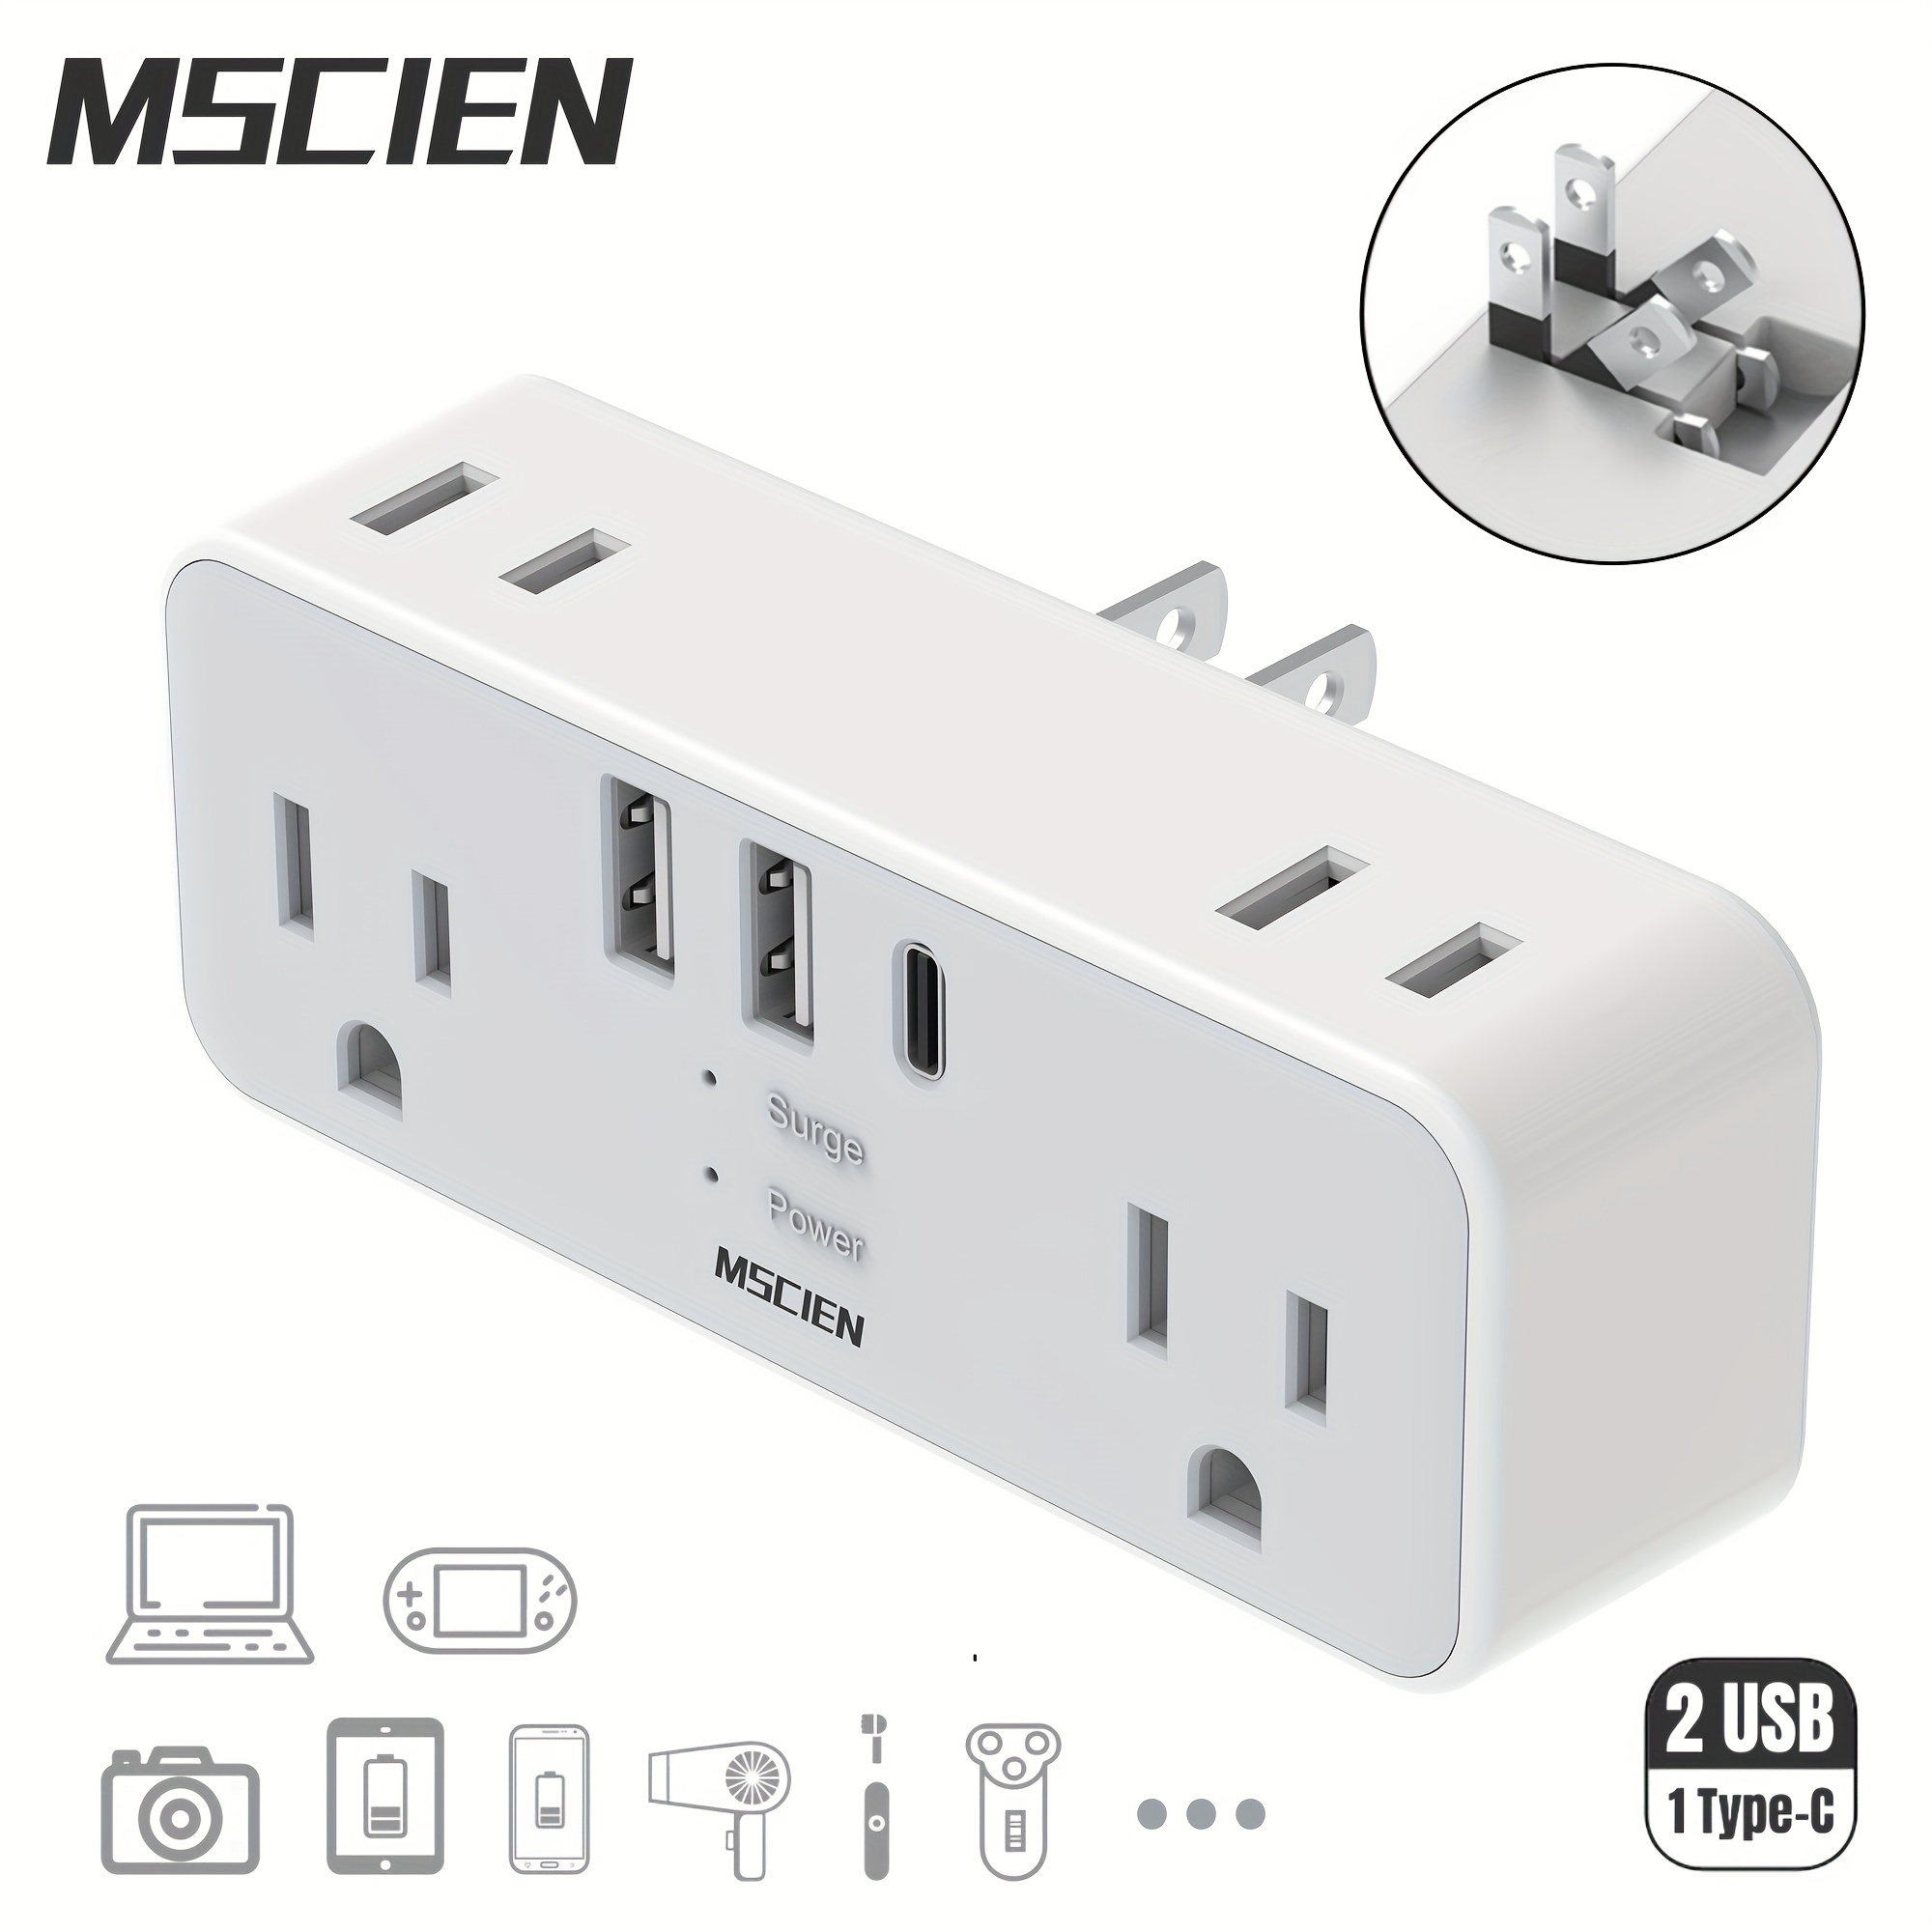 

1pc Us Plug Wall Socket With 2 Usb 1 Type-c Charging Ports, Socket Extension, Protection 6 Outlets Wall Charger With Hidden Plug, Travel Plug Adapter, America Japan China Mexico (type A Plug)